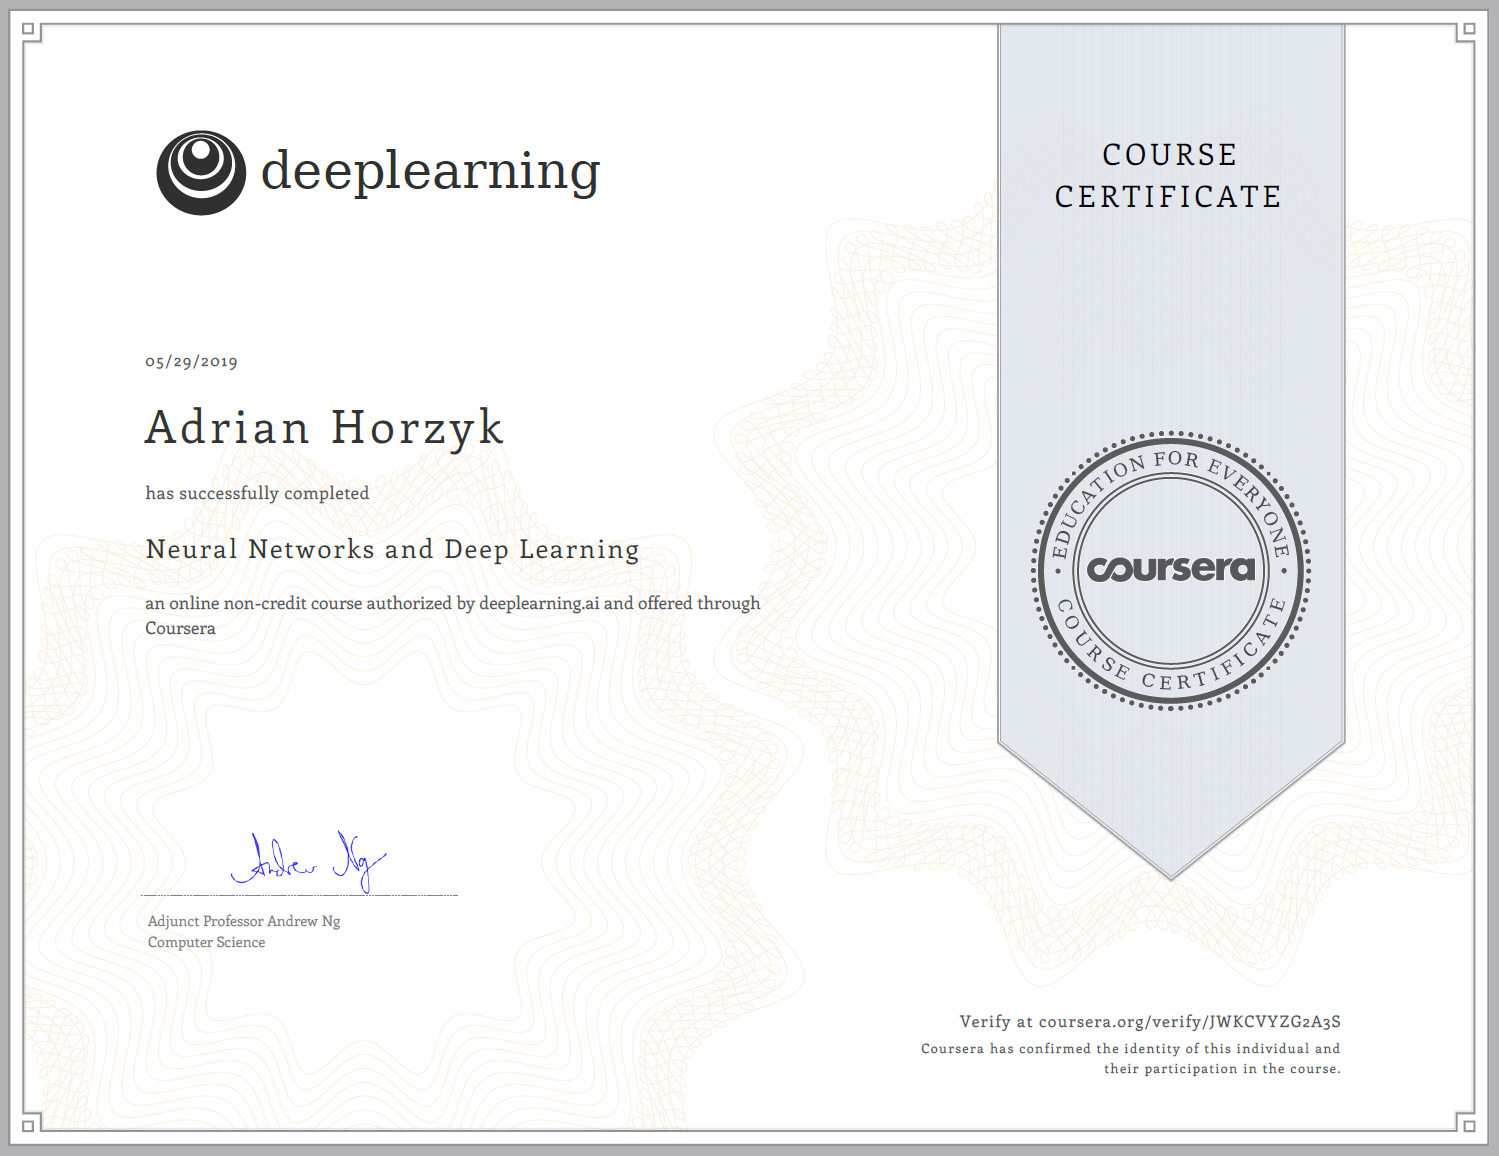 COURSERA Certificate Deep Learning Specialization Neural Networks and Deep Learning for Adrian Horzyk